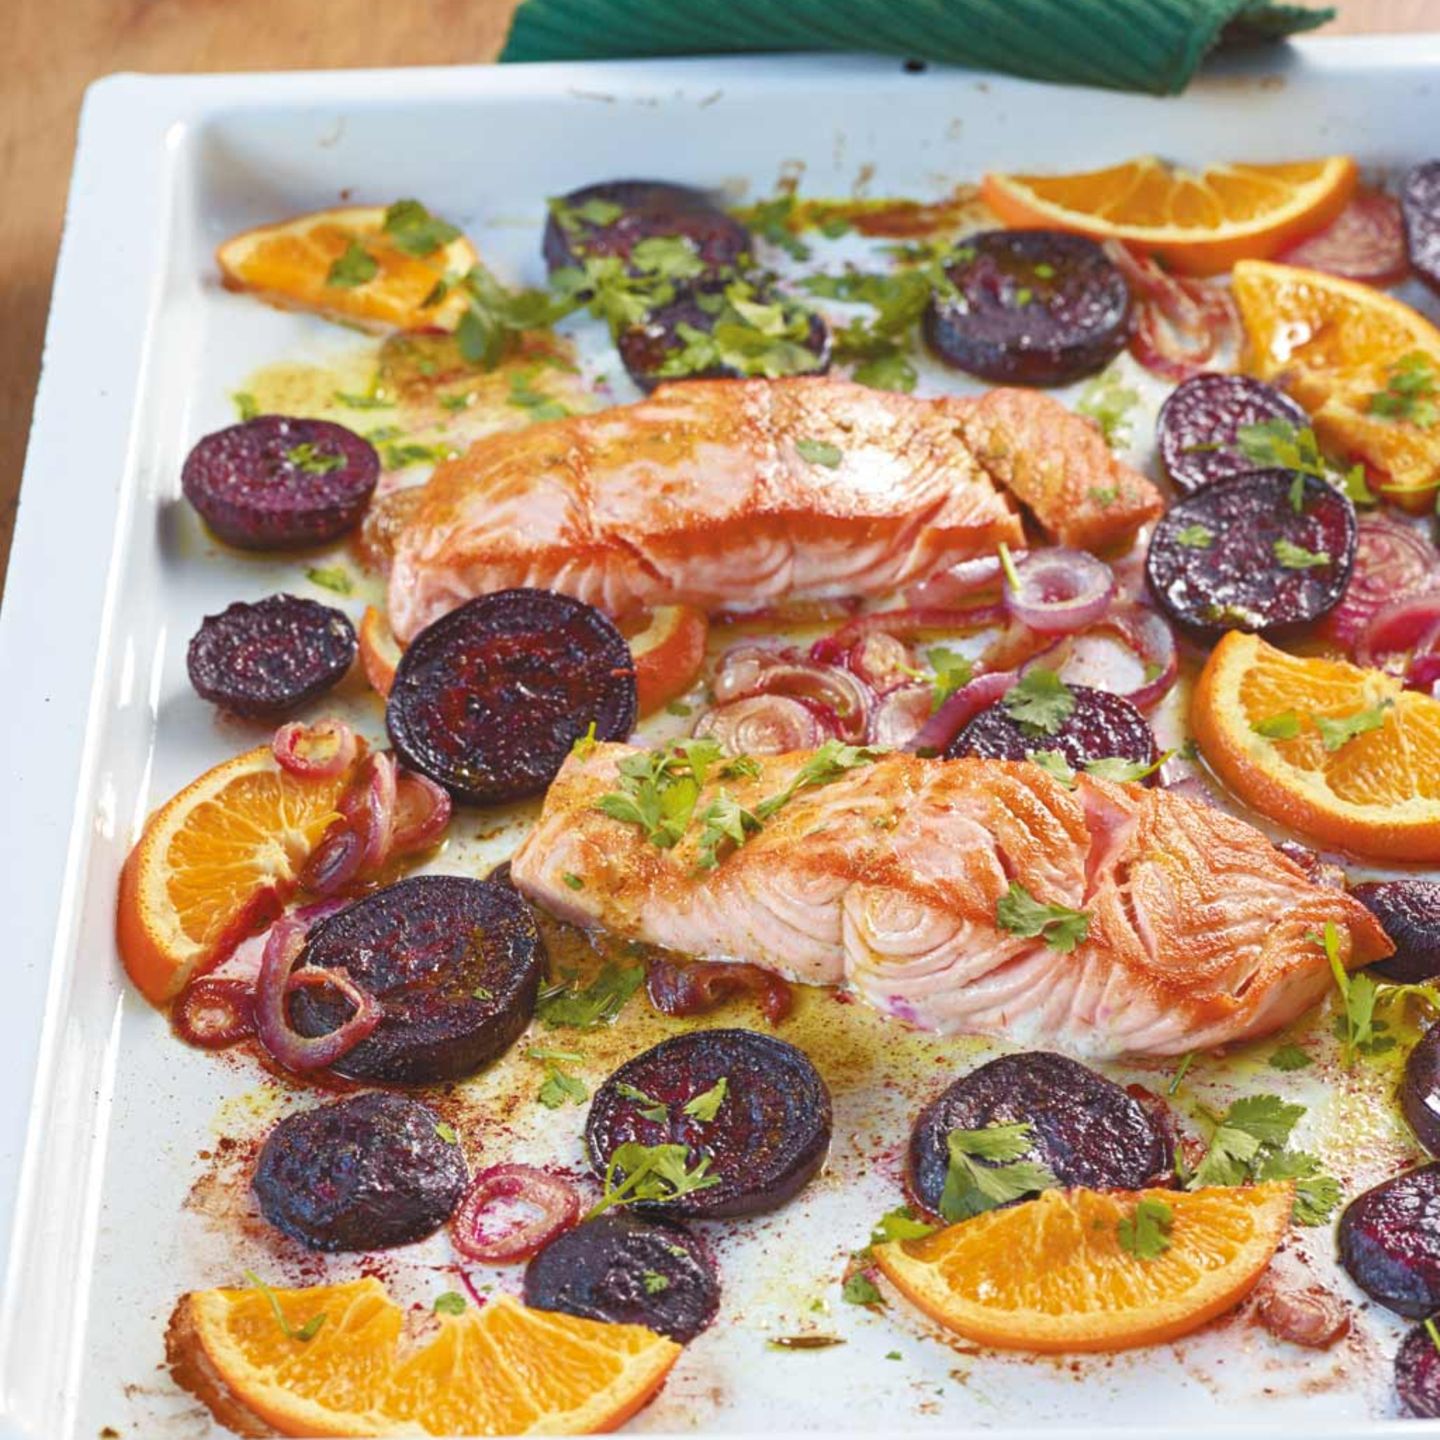 Lachs mit Roter Bete